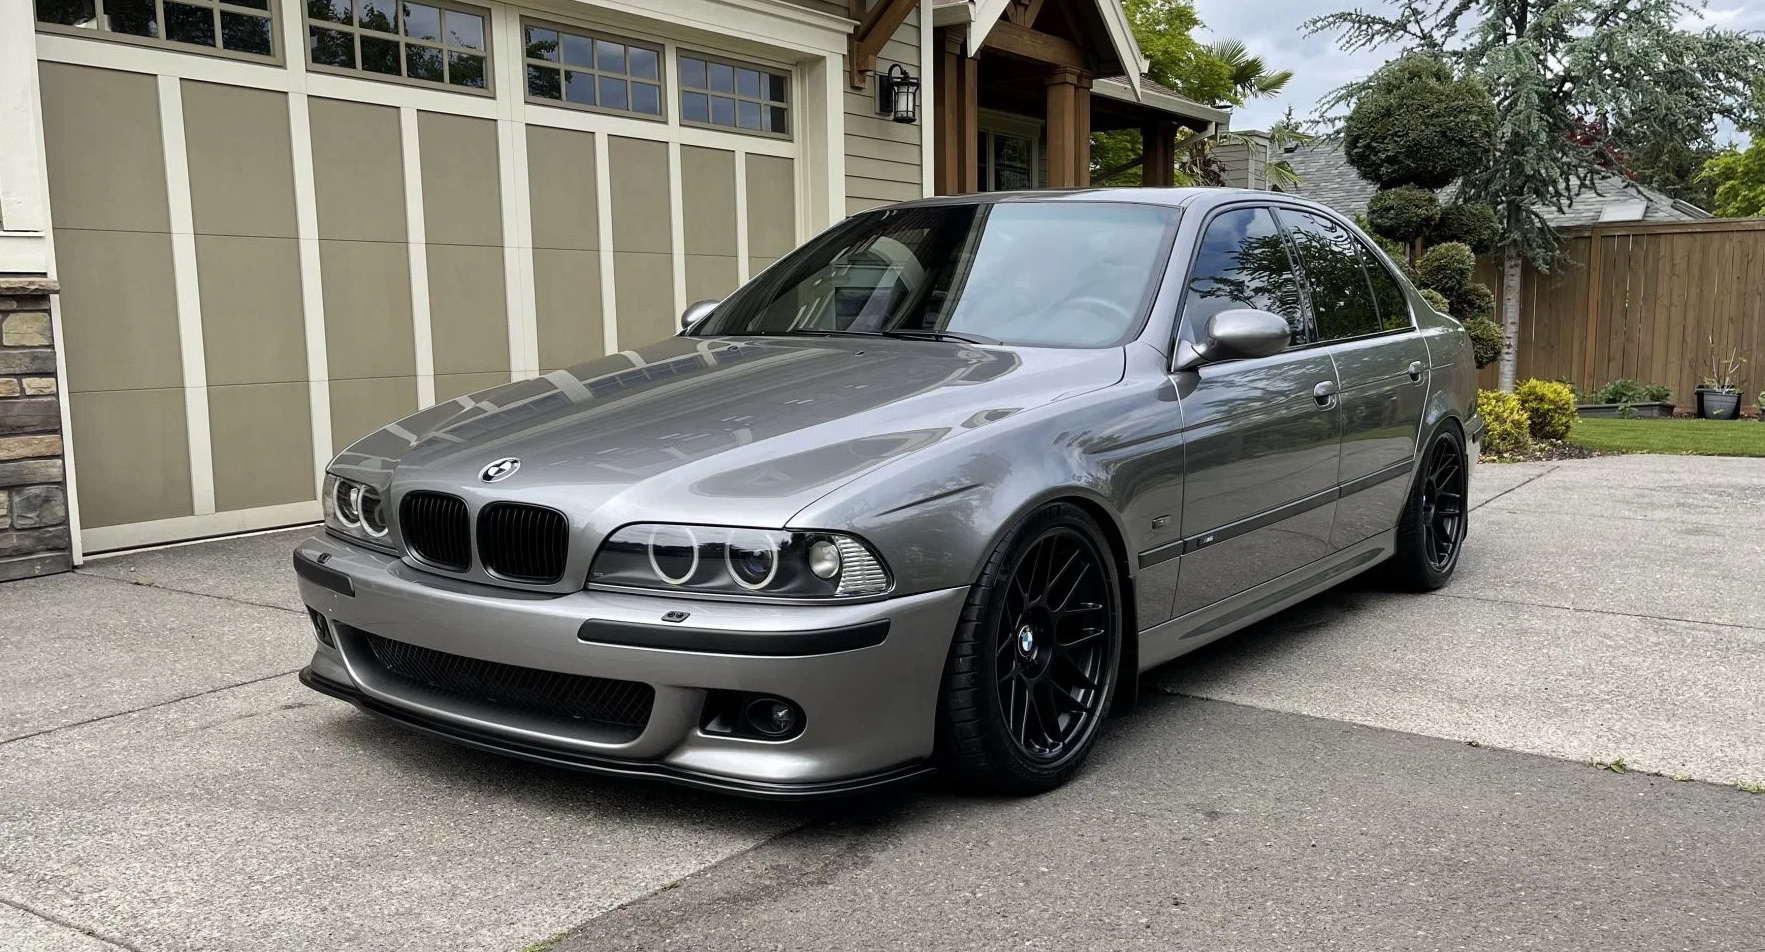 Tuned E39 BMW M5 Up for Grabs With Several Awesome Interior and Exterior  Mods - autoevolution